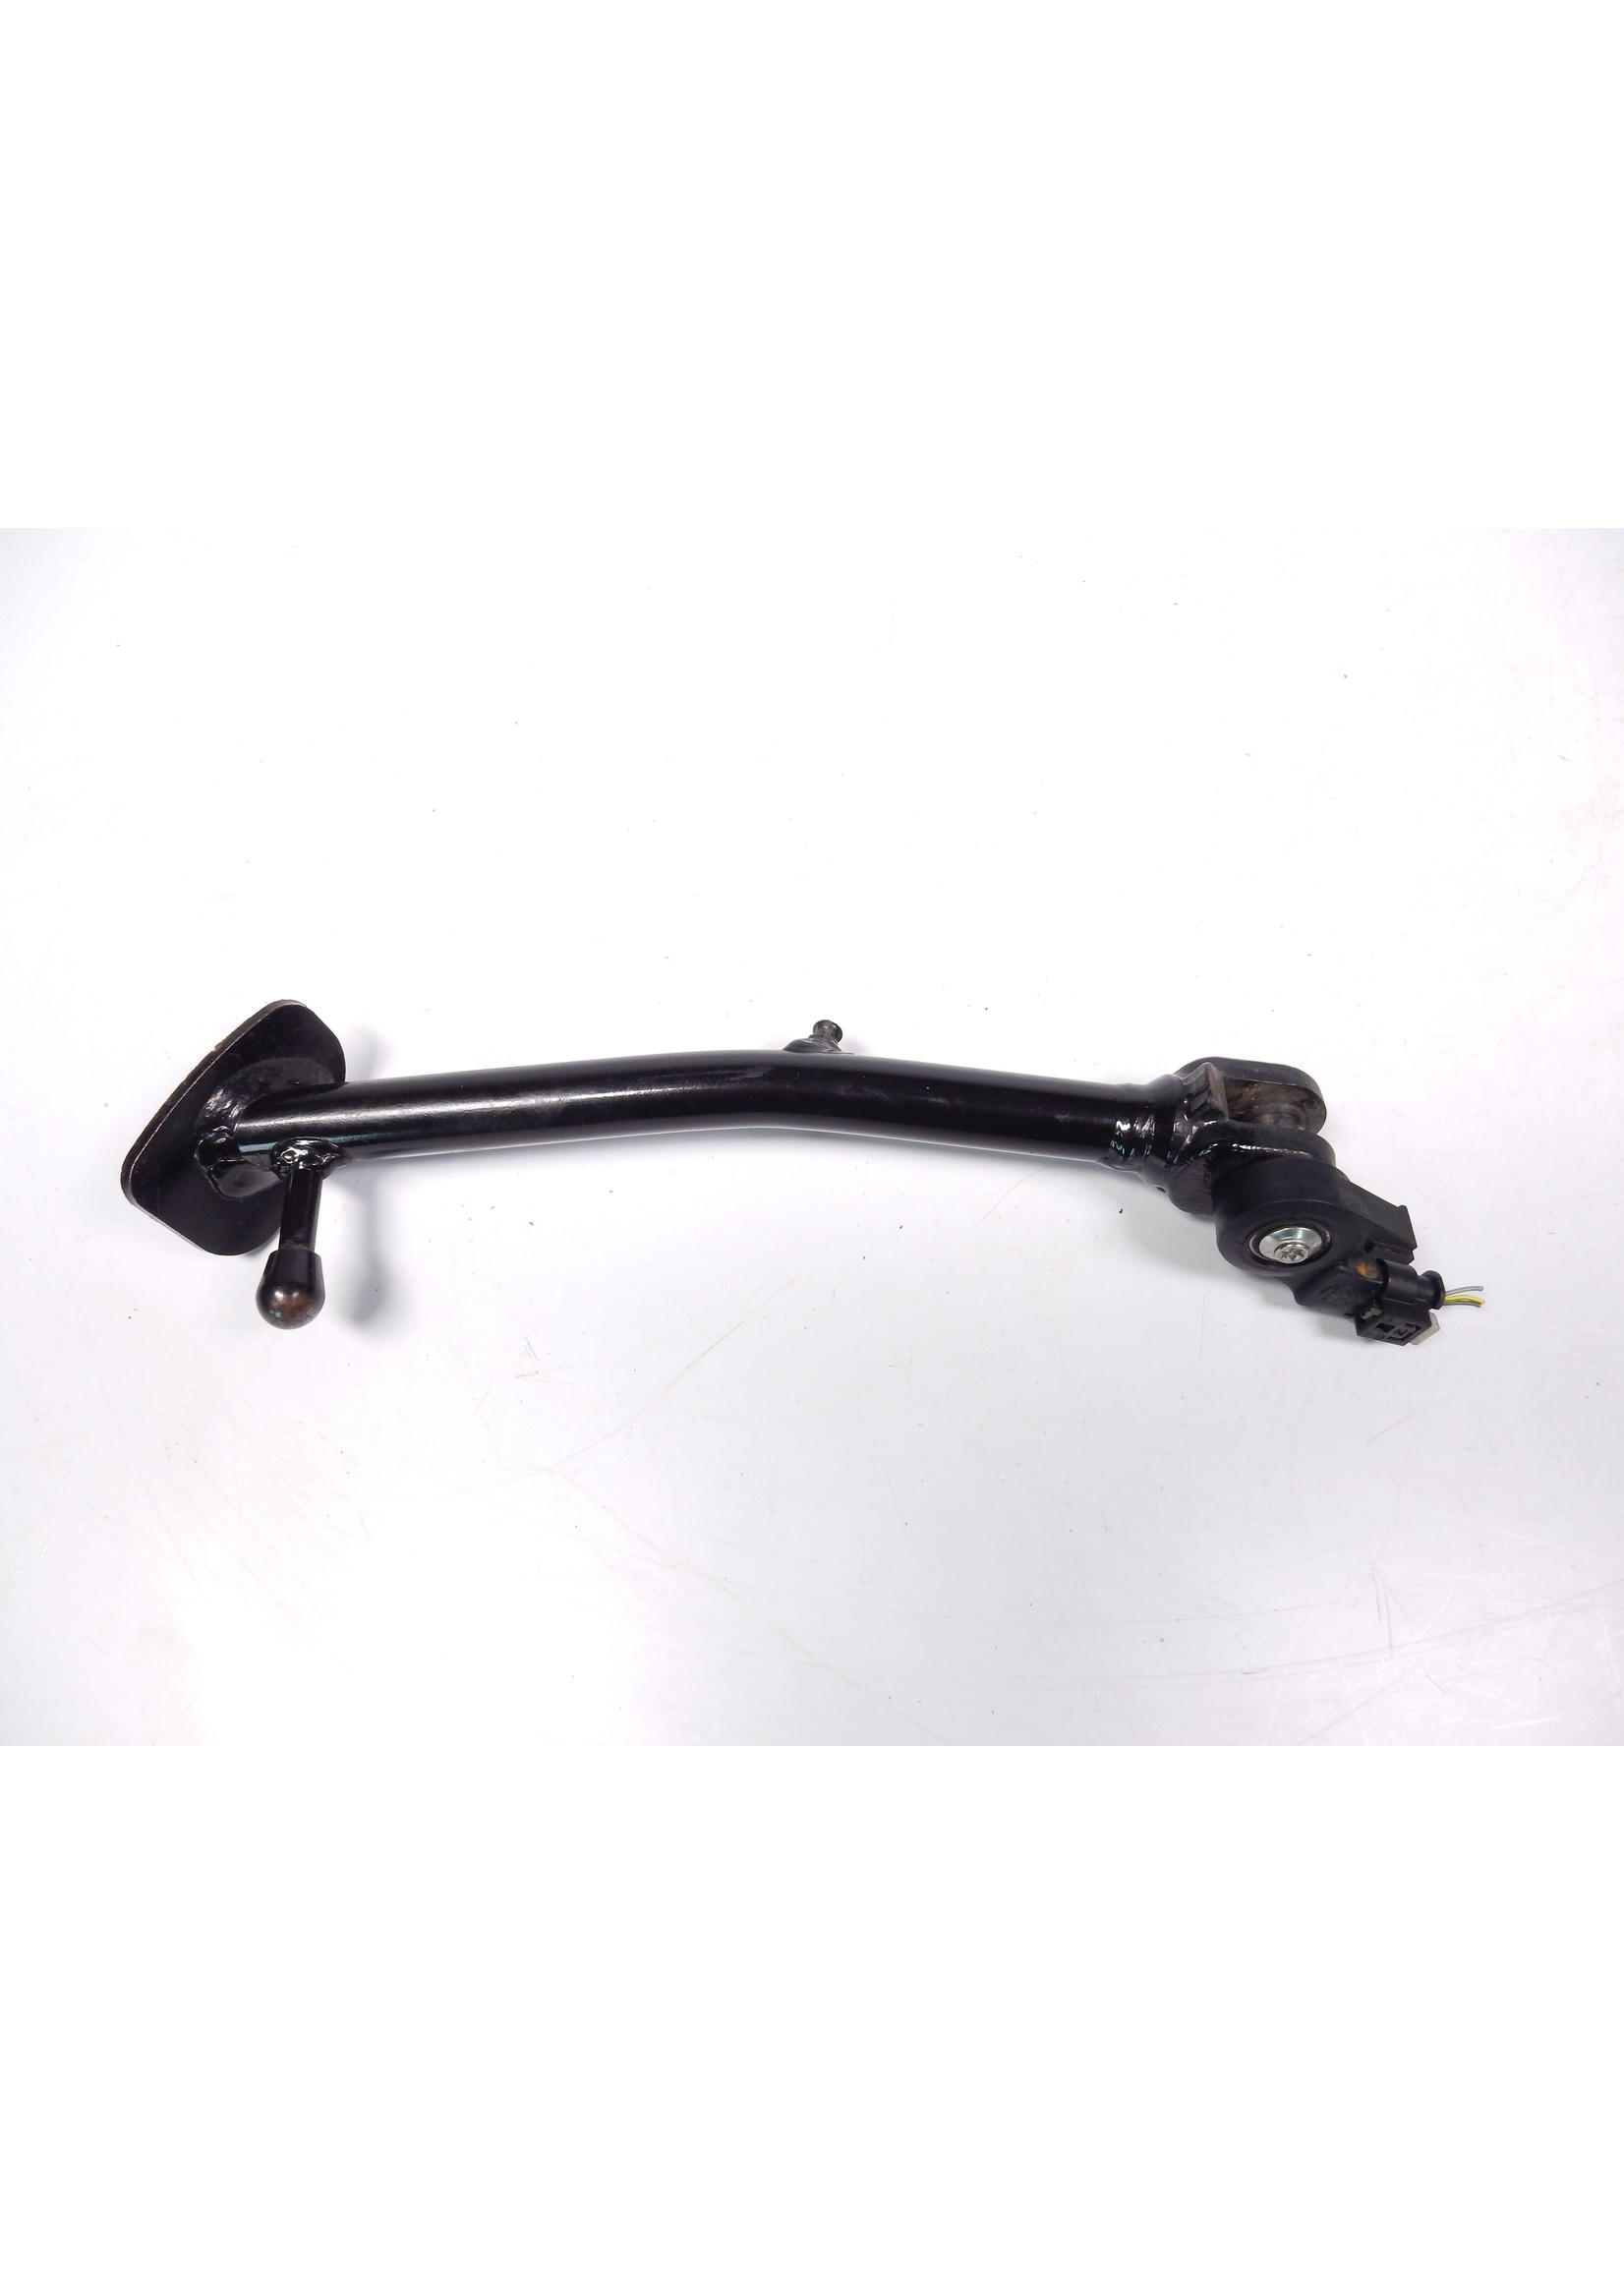 BMW BMW K 1600 Bagger Side stand / Switch, side stand / 46538521294 / 61318388642